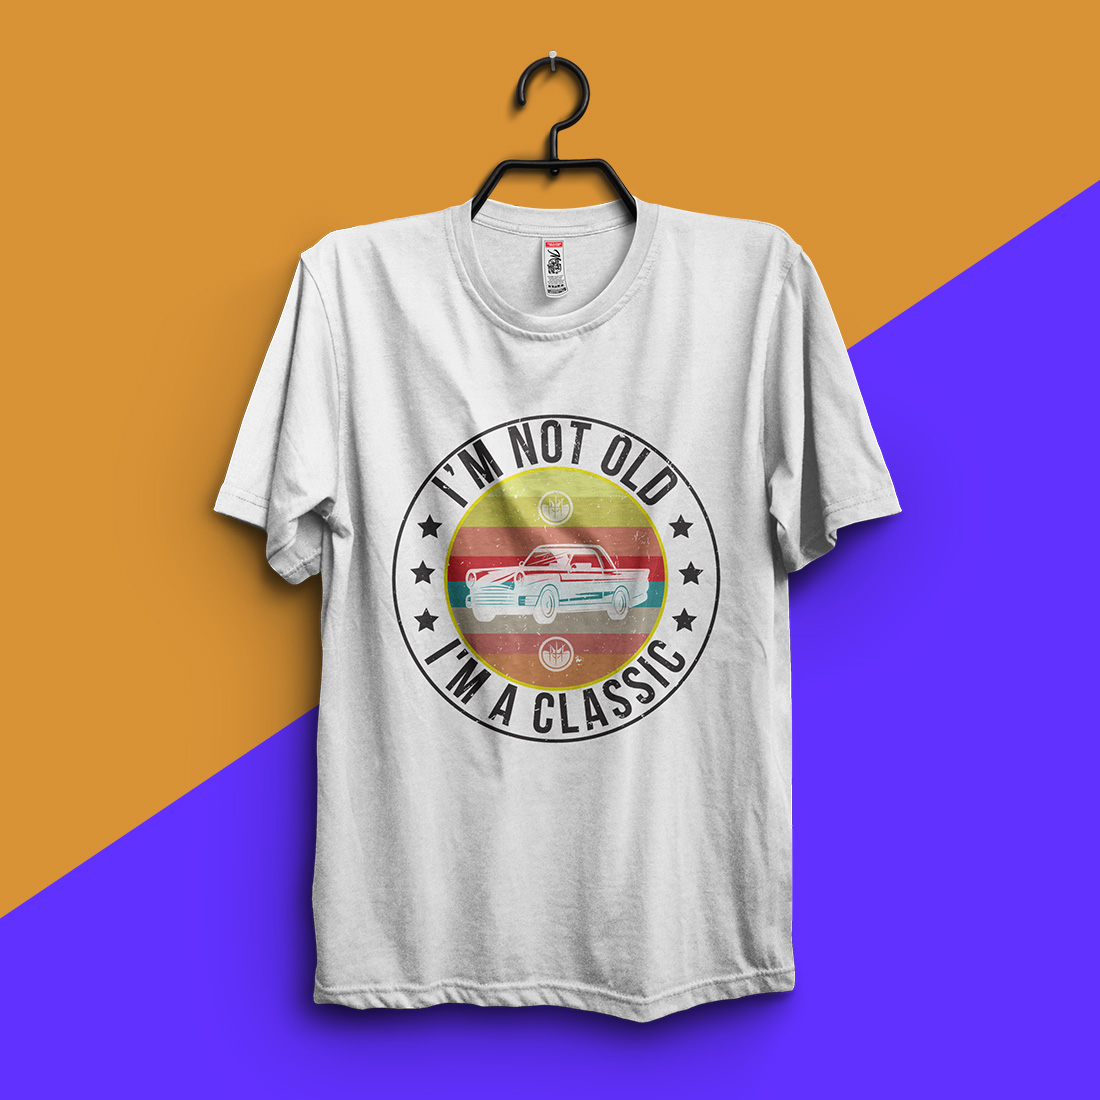 Image of white t-shirt with colorful retro car print